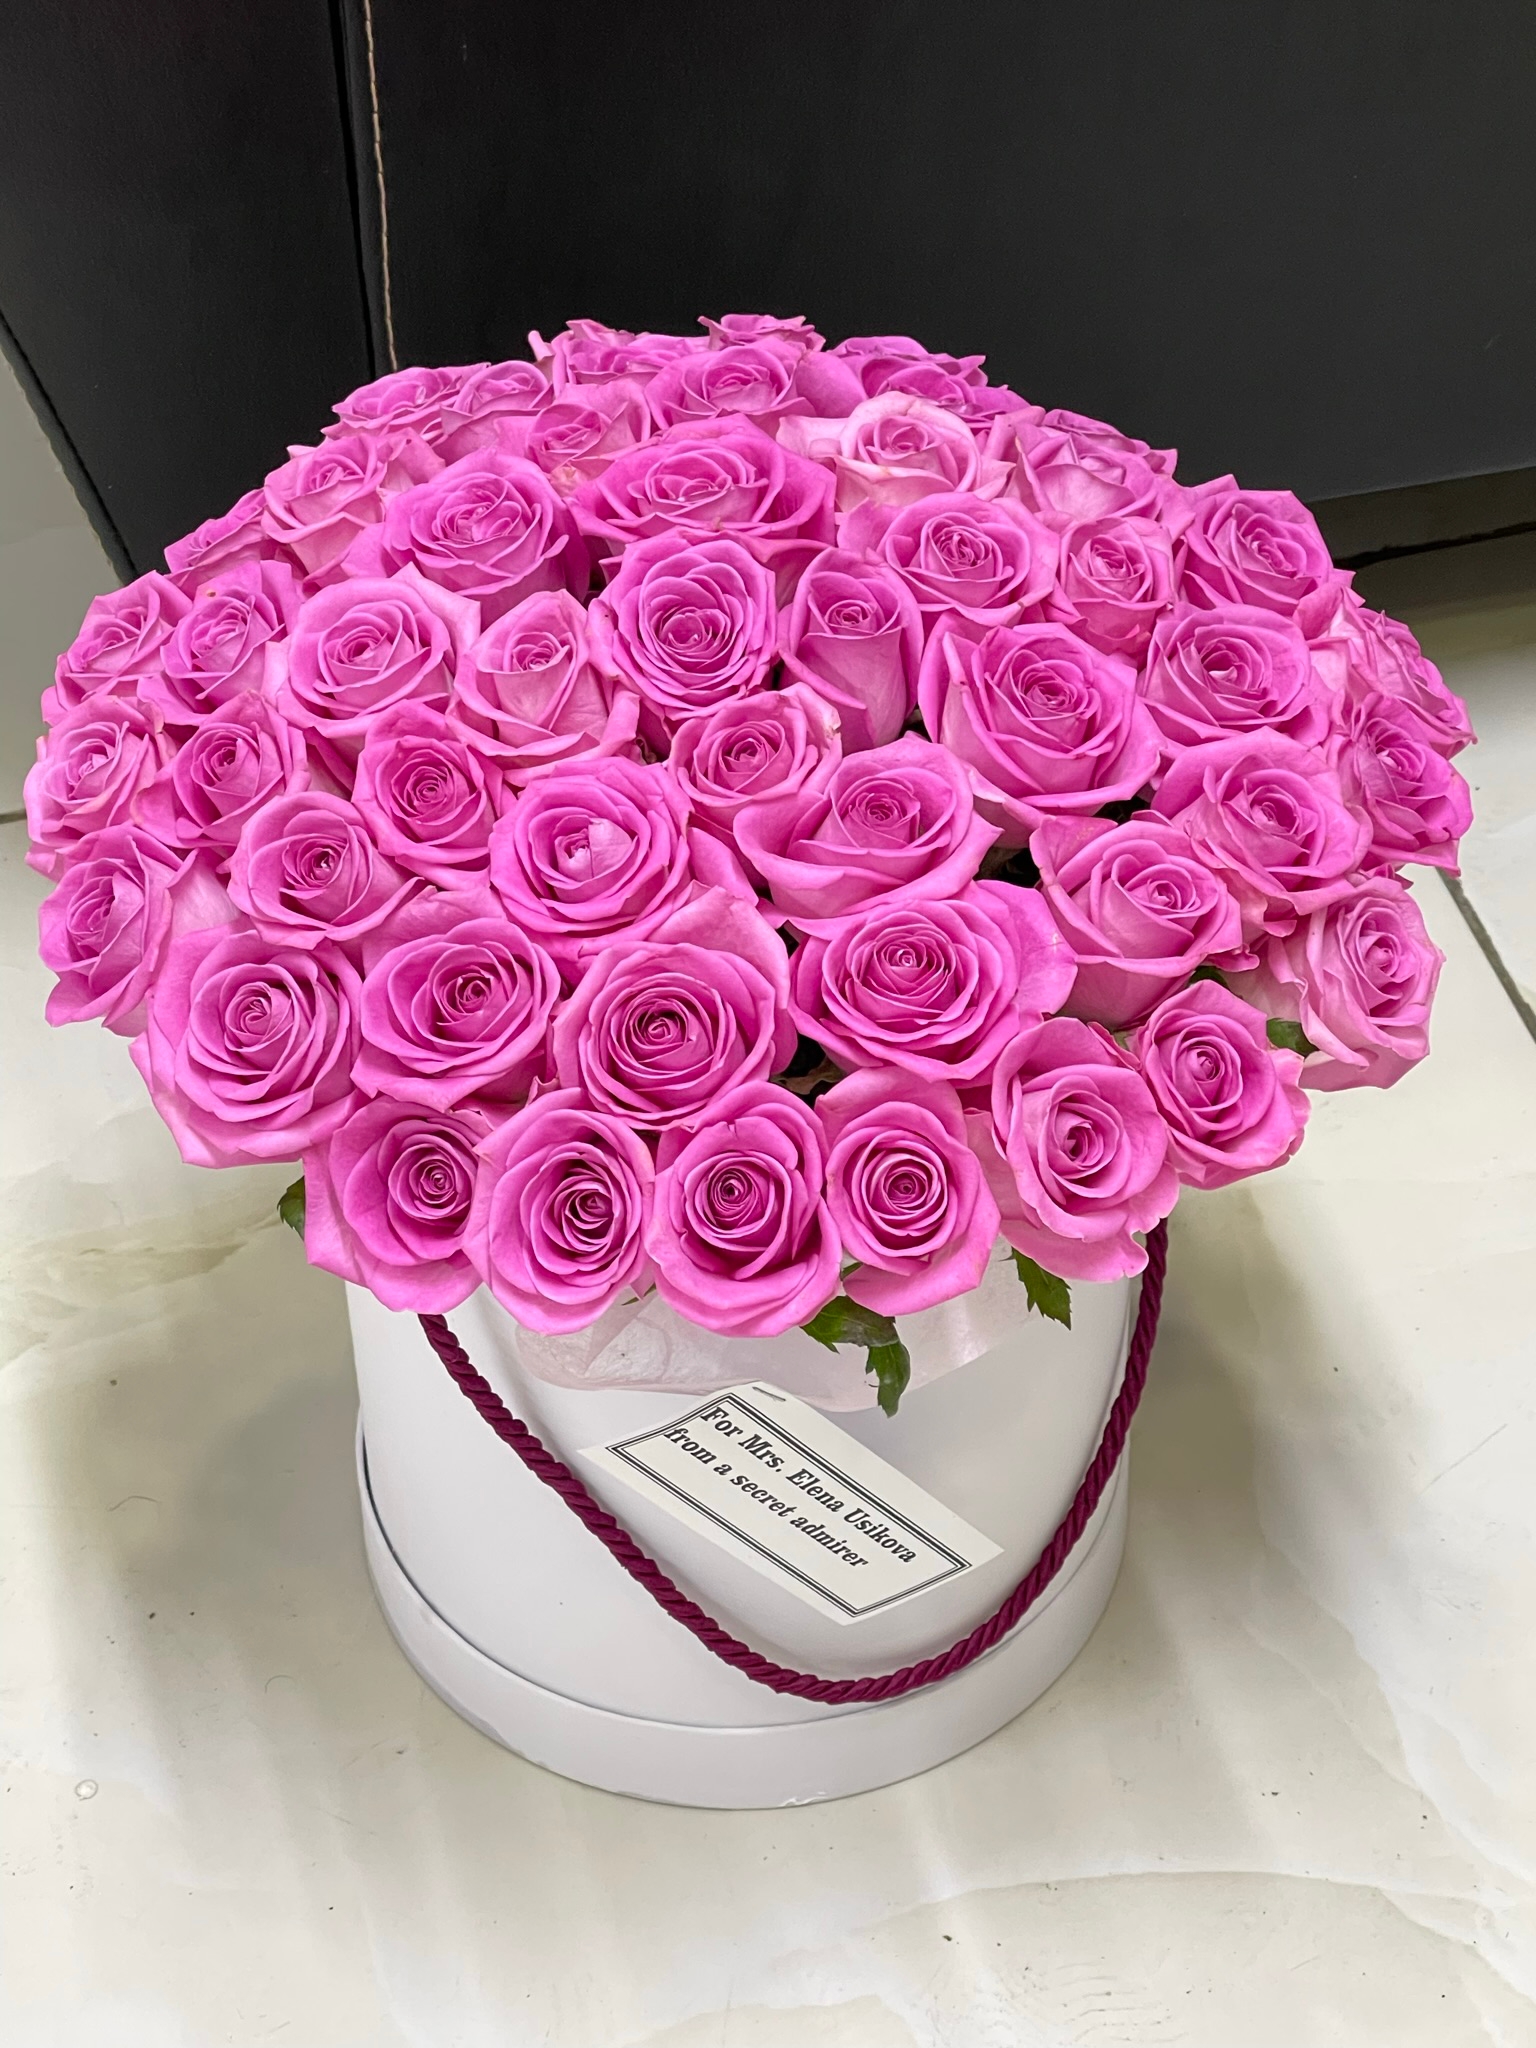 mix bouquet 51 Pcs Pink Roses in a White Box 